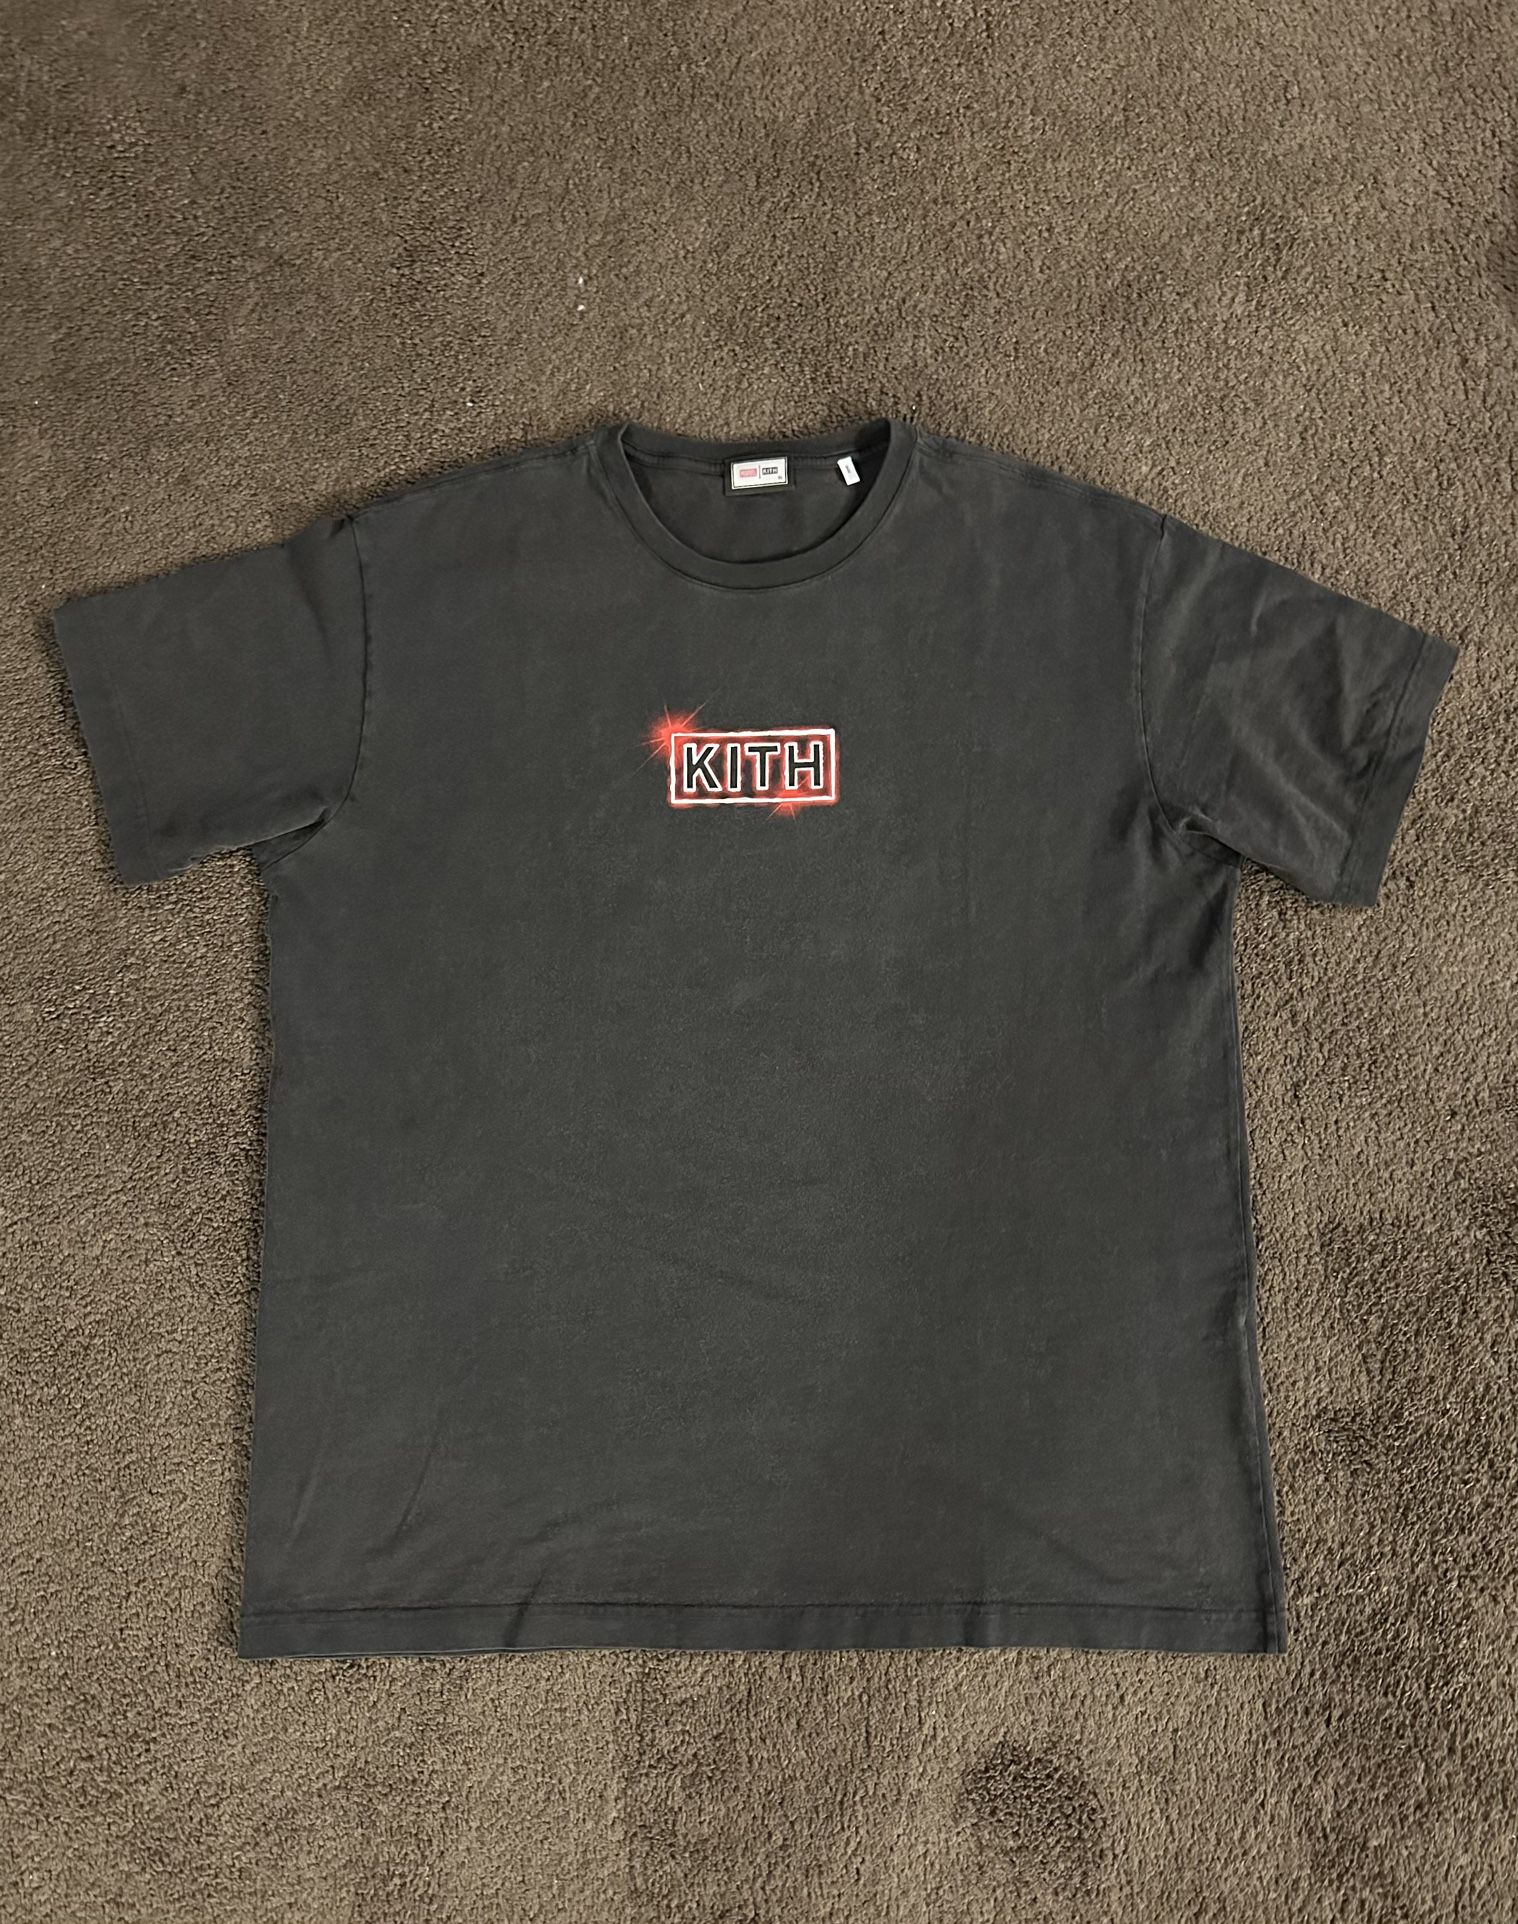 Kith x Marvel X-Men Cyclops Vintage Tee for Sale in Anaheim, CA